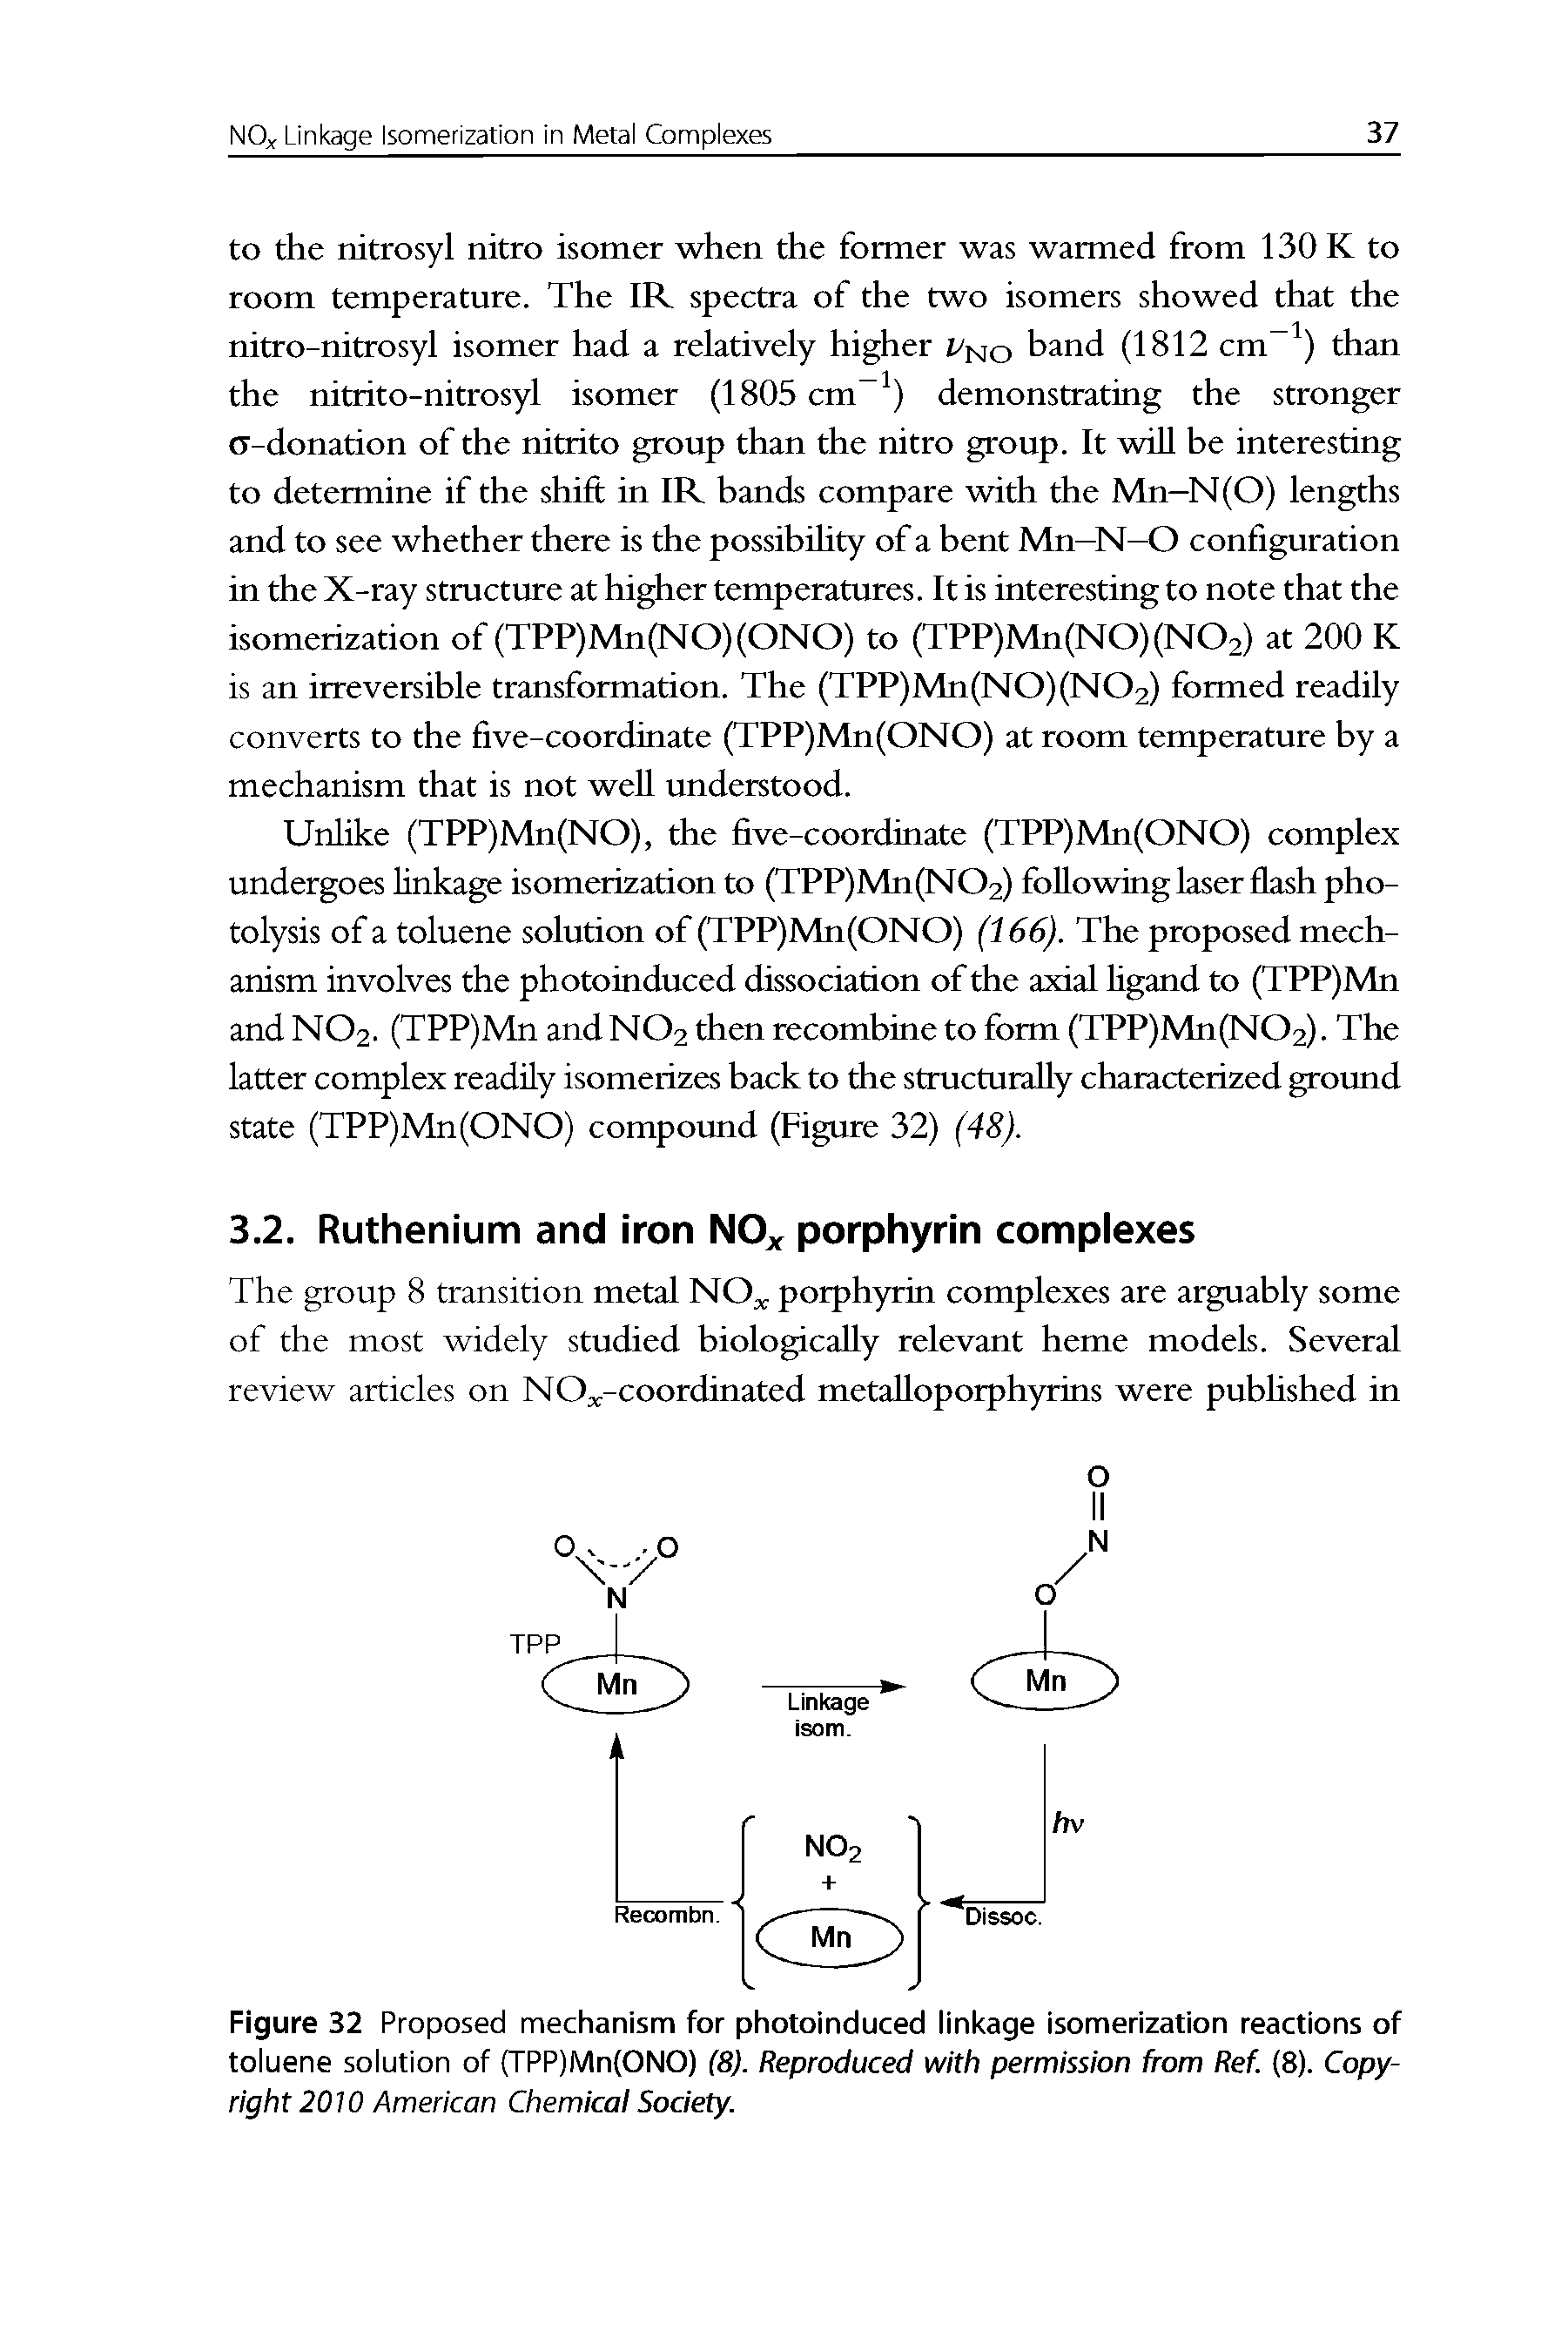 Figure 32 Proposed mechanism for photoinduced linkage isomerization reactions of toluene solution of (TPP)Mn(ONO) (8). Reproduced with permission from Ref. (8). Copyright 2010 American Chemicai Society.